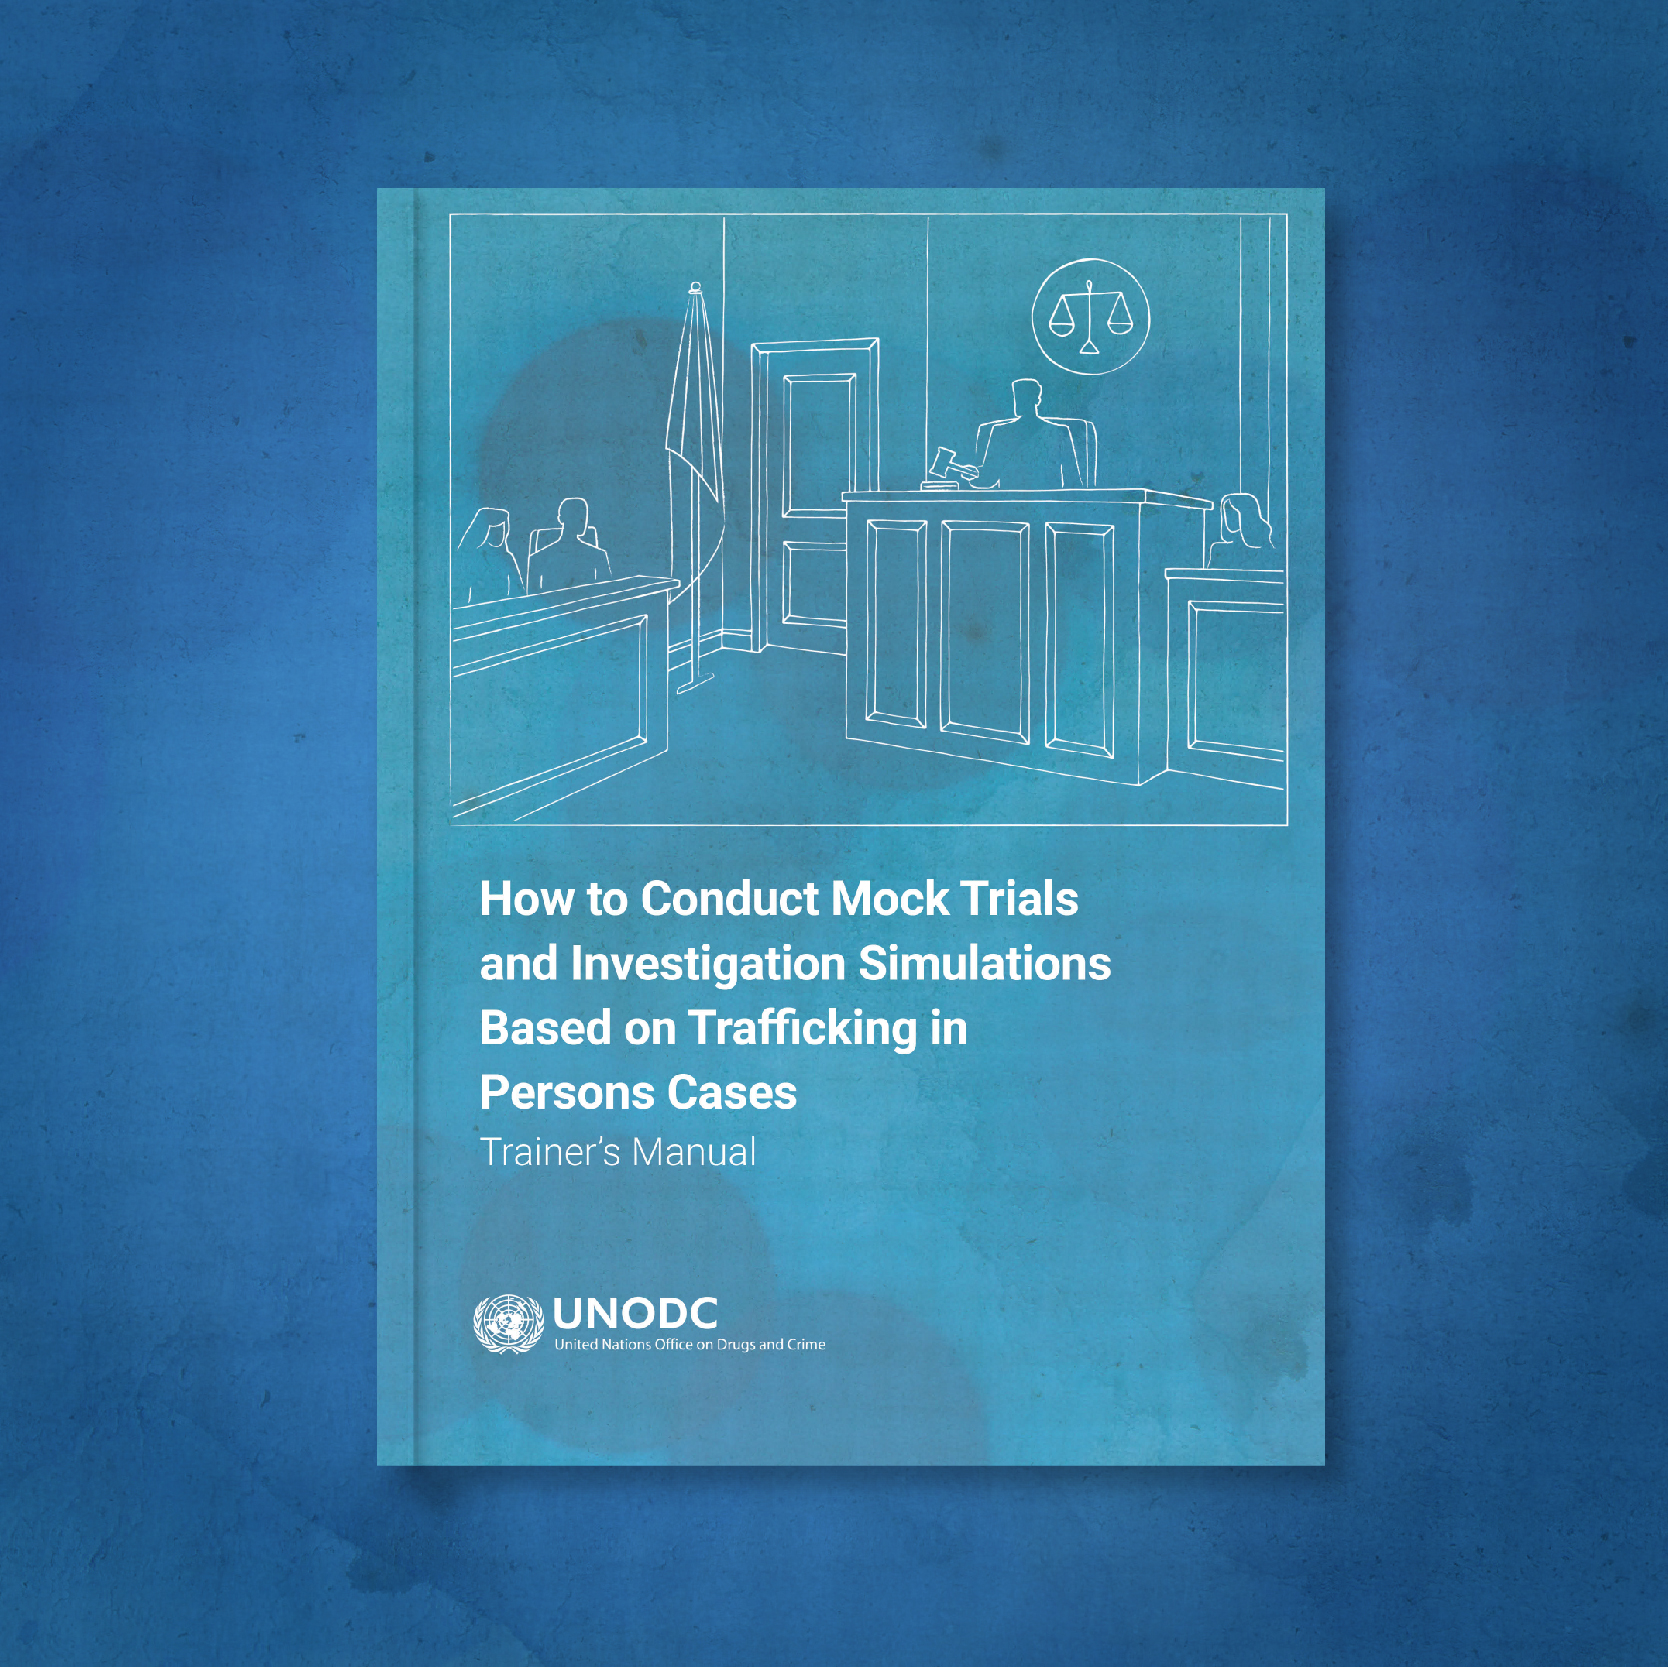 Cover of the Trainer's Manual "How to Conduct Mock Trials and Investigation Simulations Based on Trafficking in Persons"